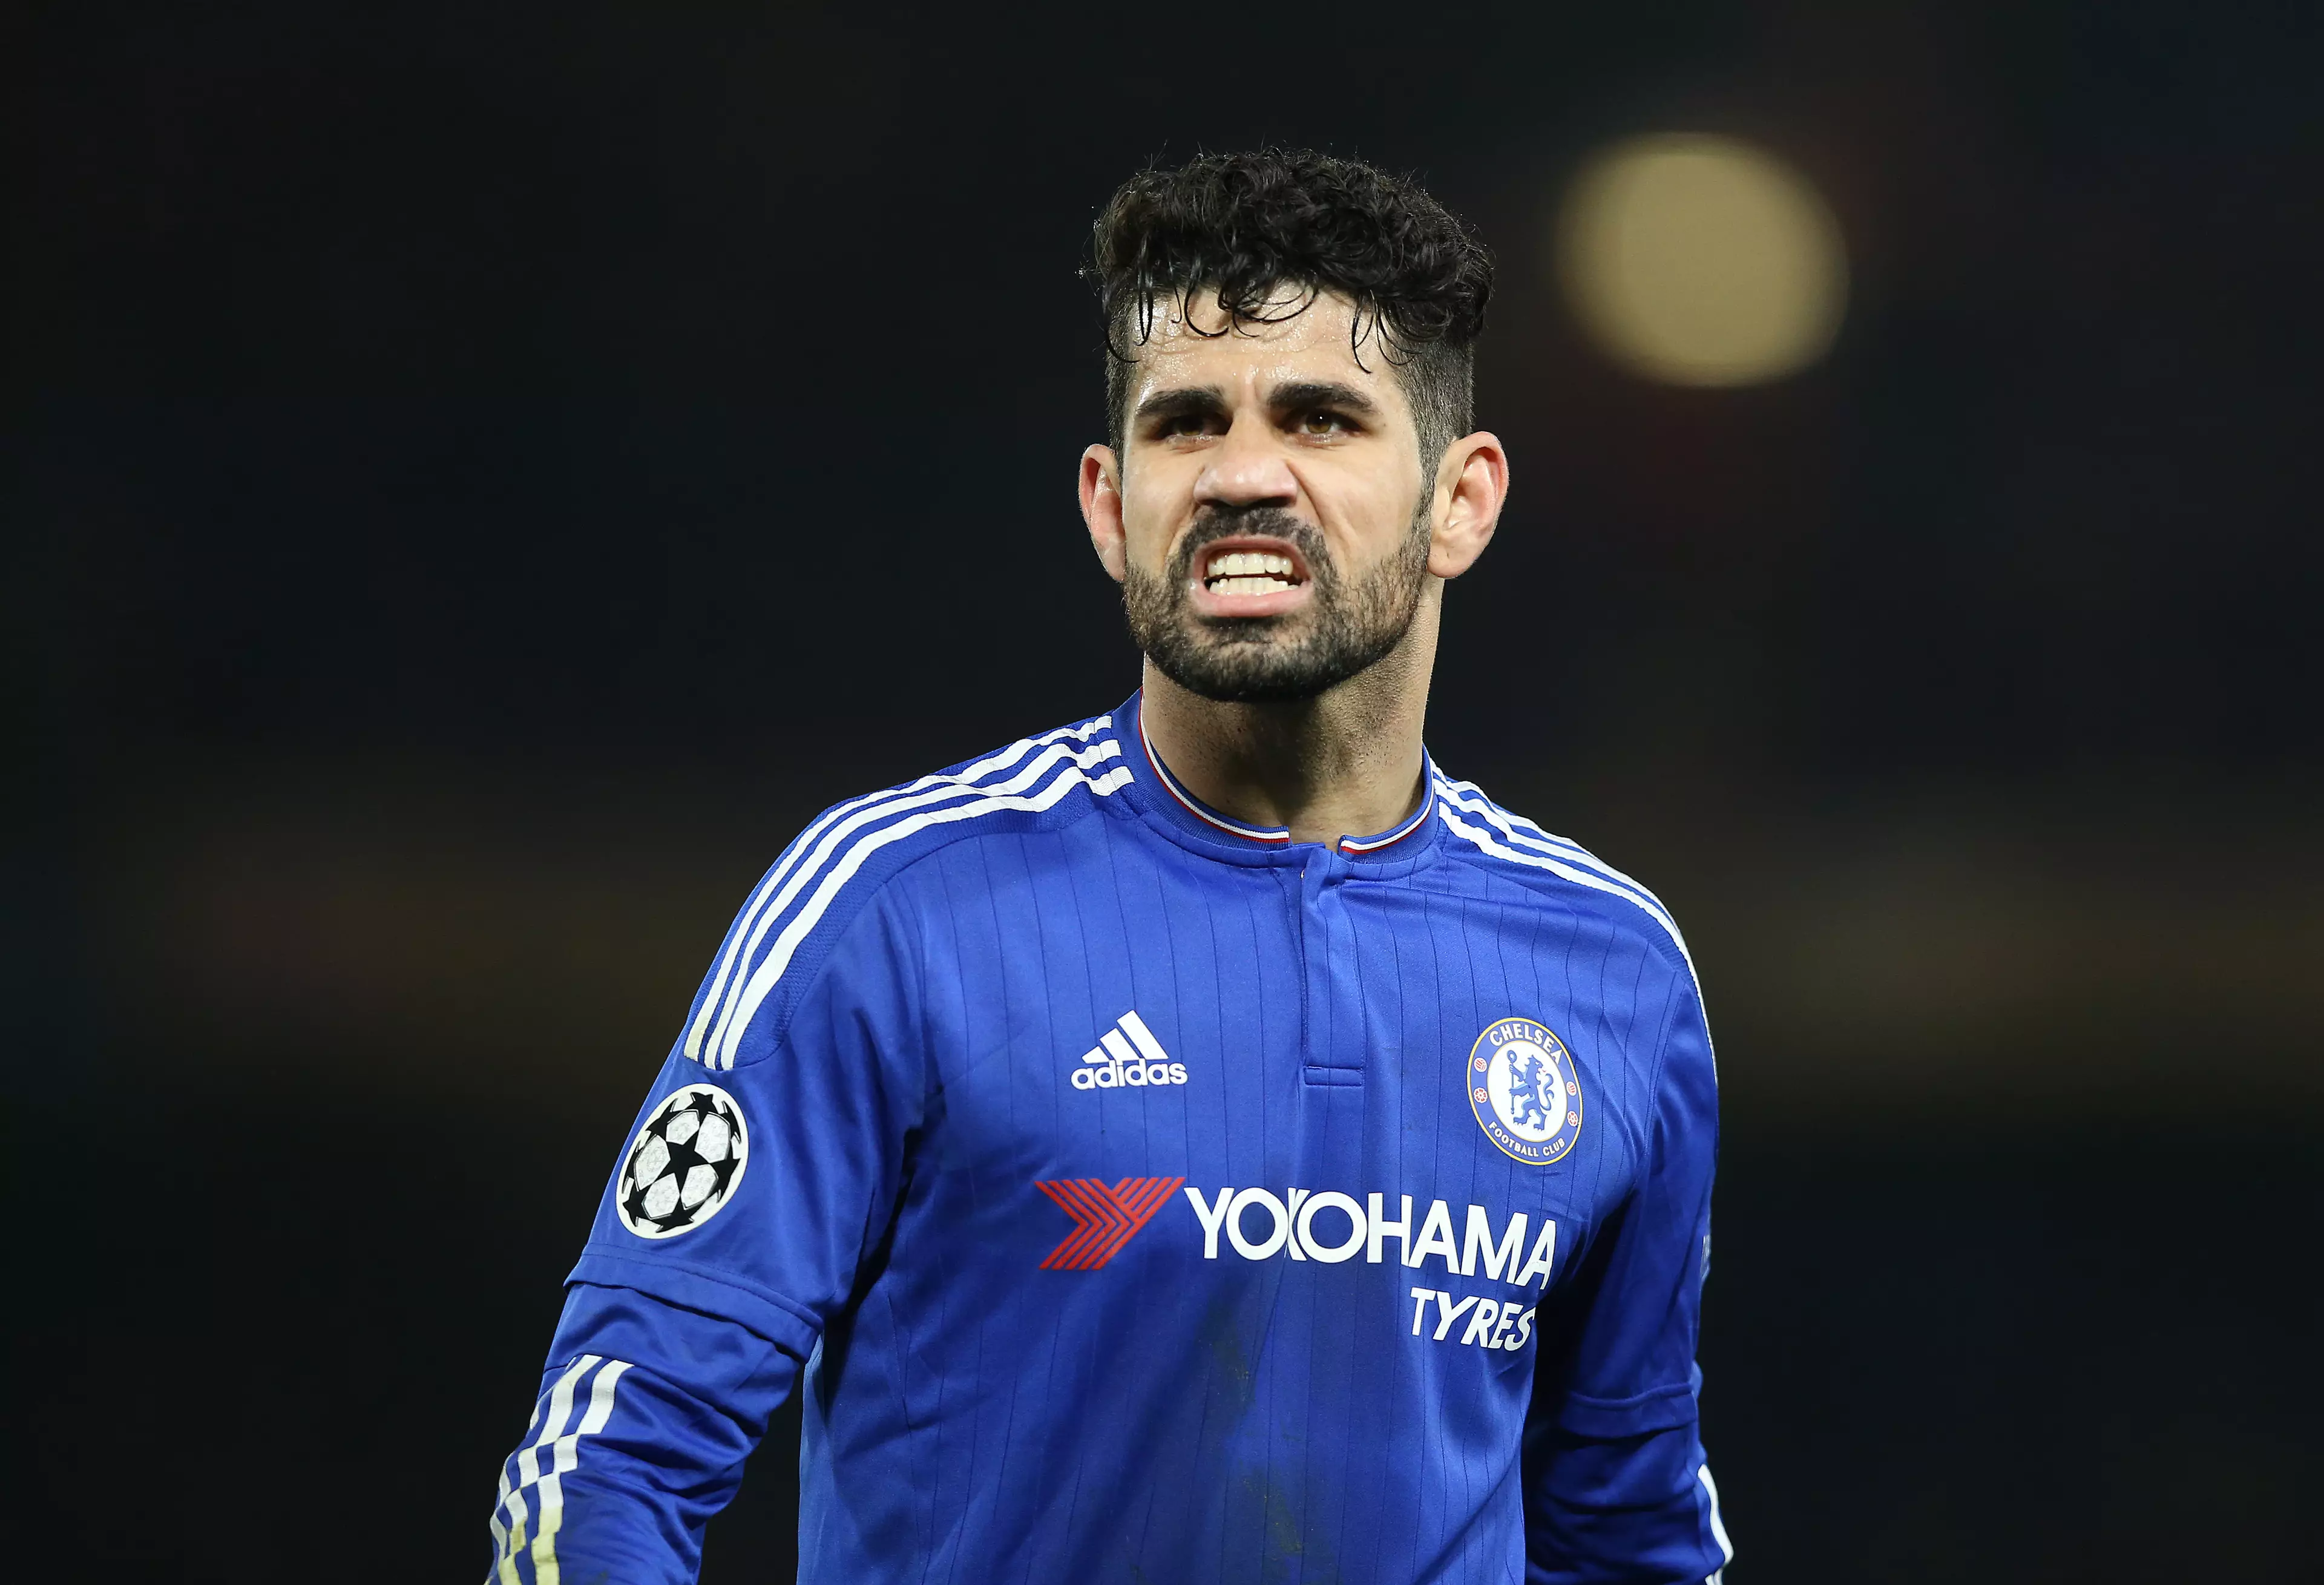 Costa left Chelsea after two Premier League title winning campaigns in three years, after a falling out with manager Antonio Conte. Images: PA